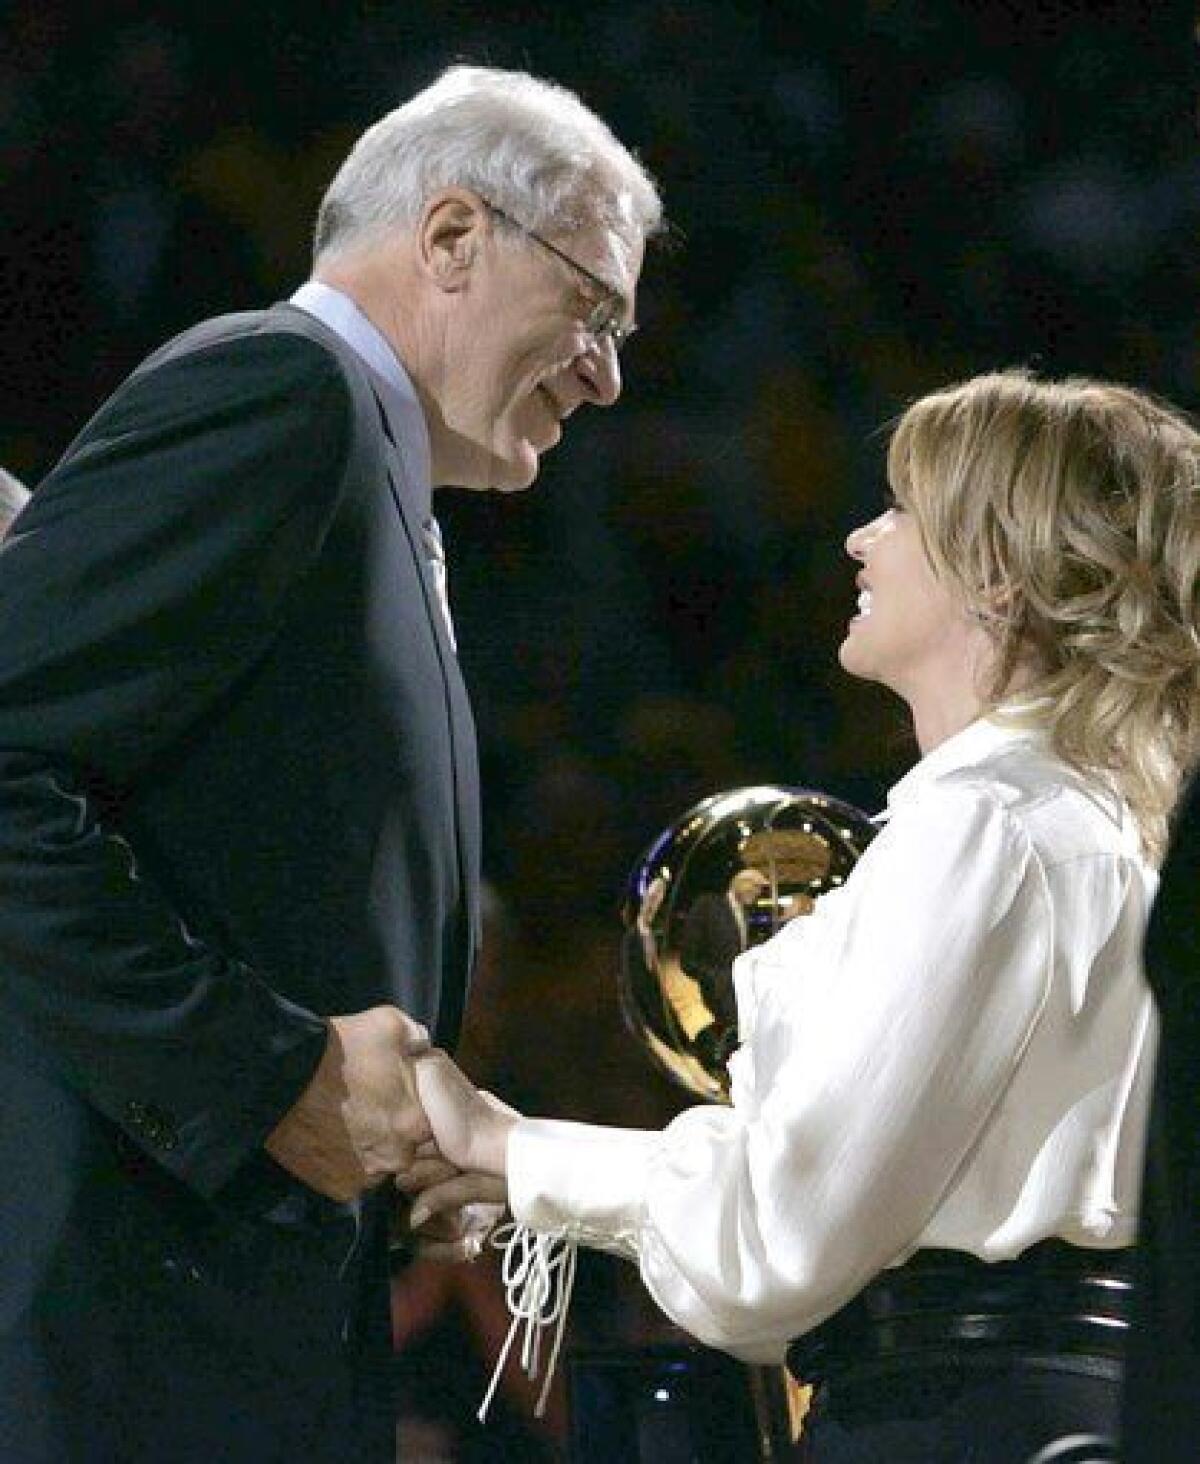 Phil Jackson accepts his 2009 NBA championship ring from Jeanie Buss before the 2009-10 season opener against the Clippers at Staples Center.